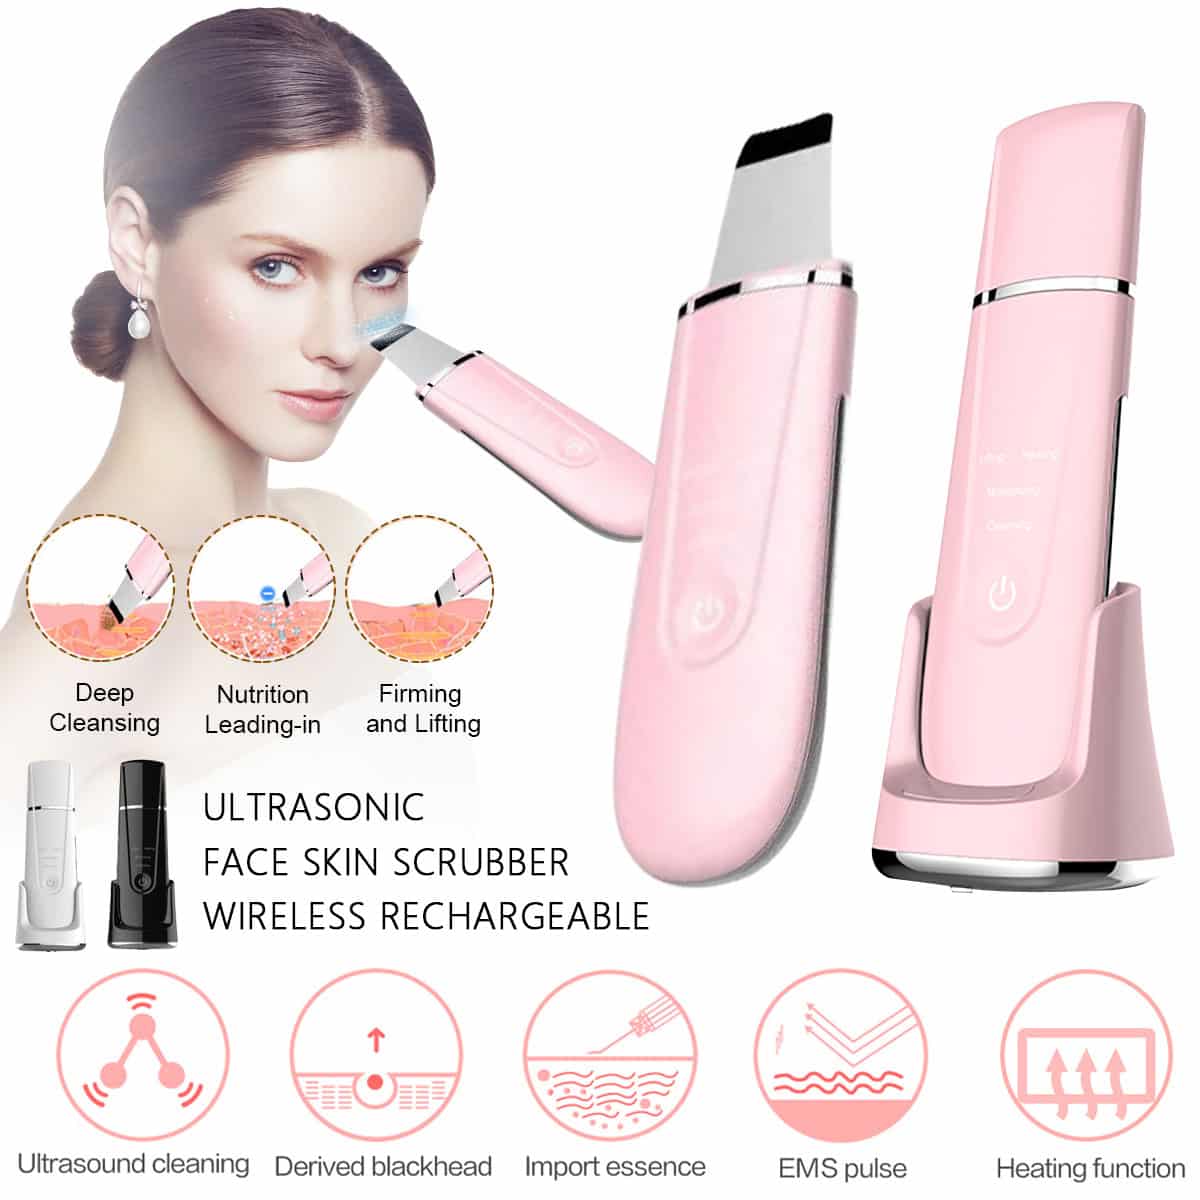 Wireless Charging Base Heating Dead Spatula Face Lift Exfoliating Remove Blackhead Beauty Facial Cleanser Ultrasonic Skin Scrubber插图4